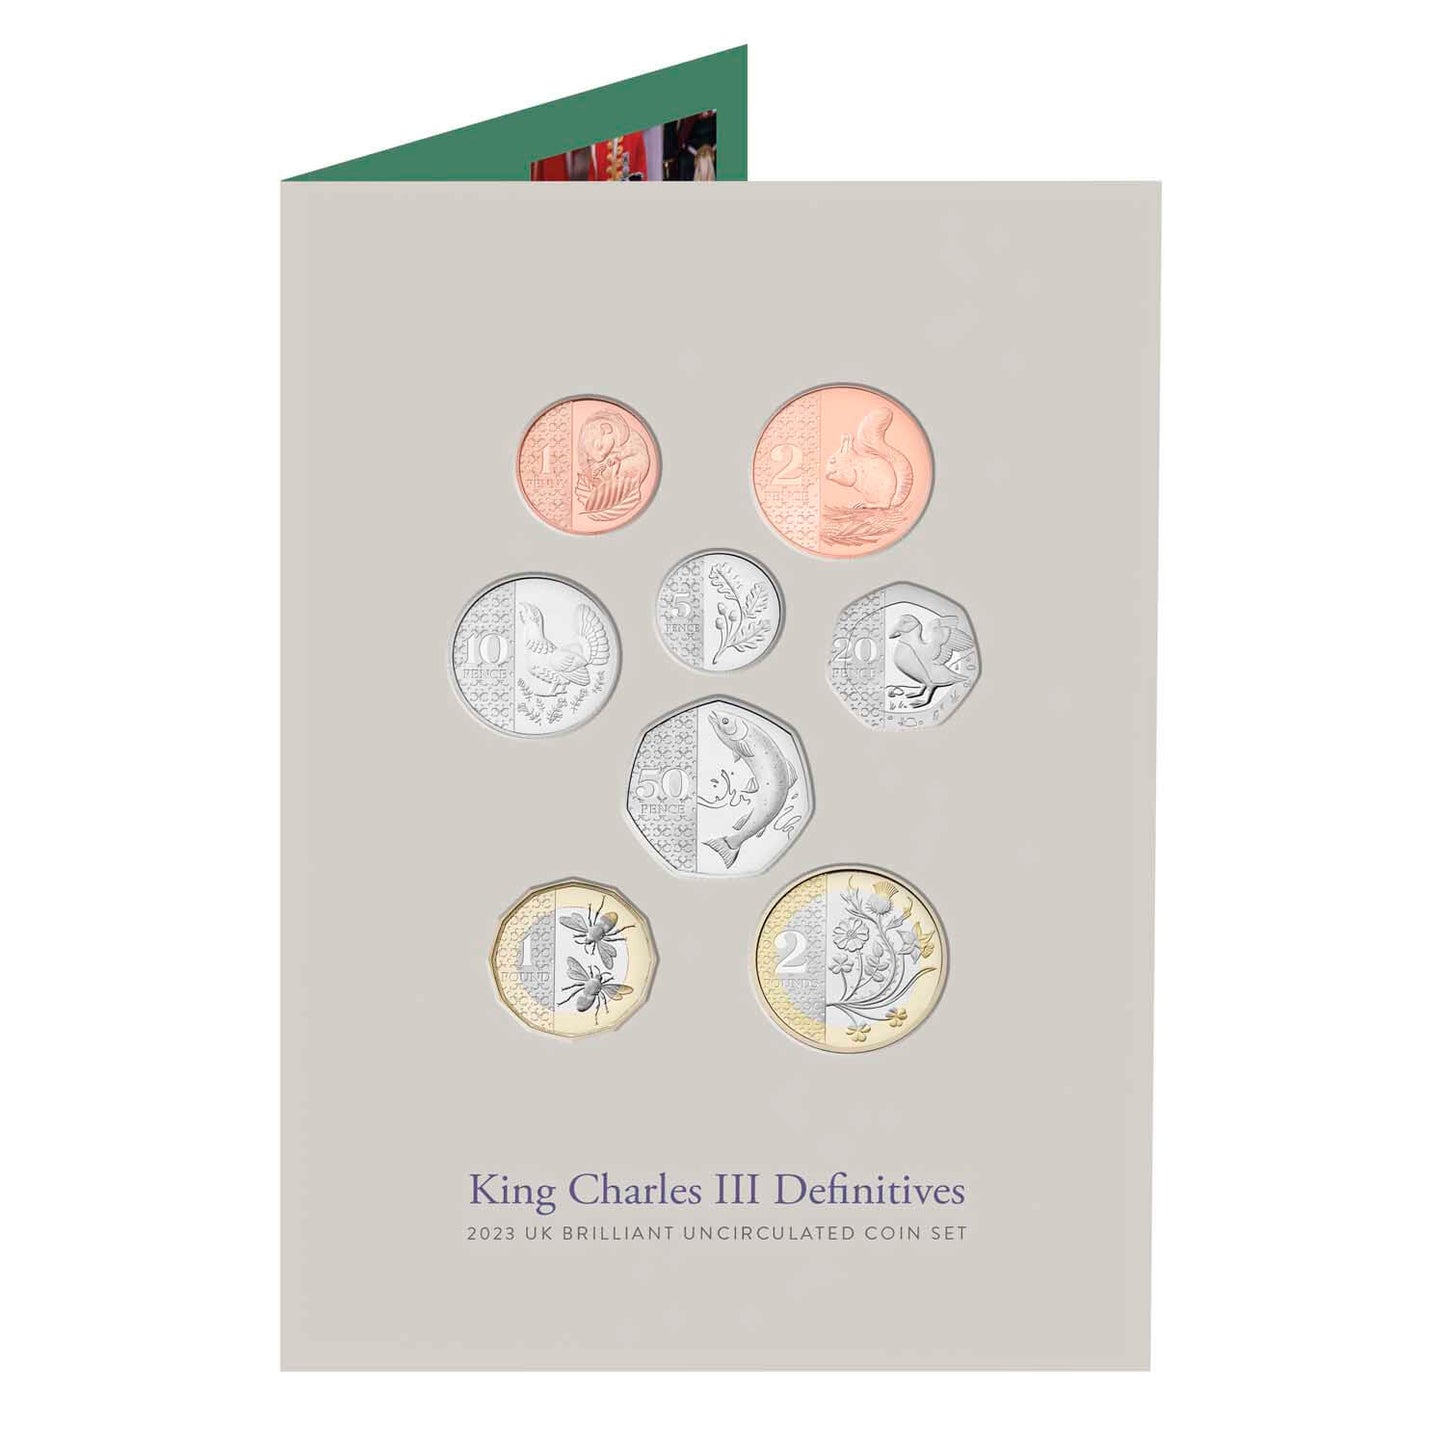 King Charles III Definitives 2024 UK Brilliant Uncirculated Coin Set